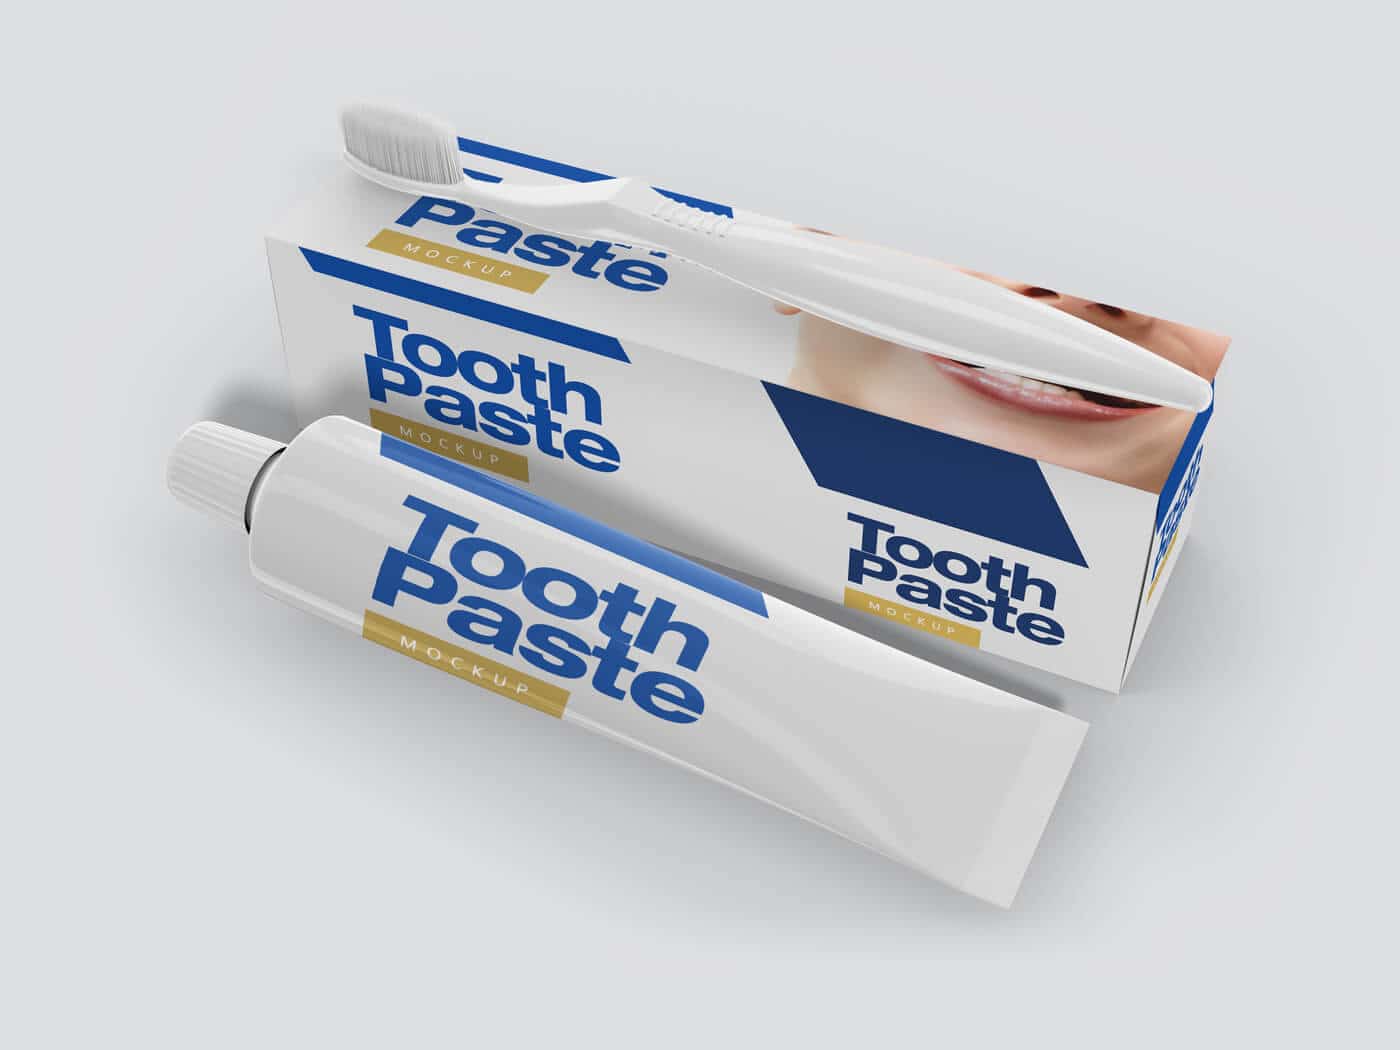  Tooth Paste Mockup 